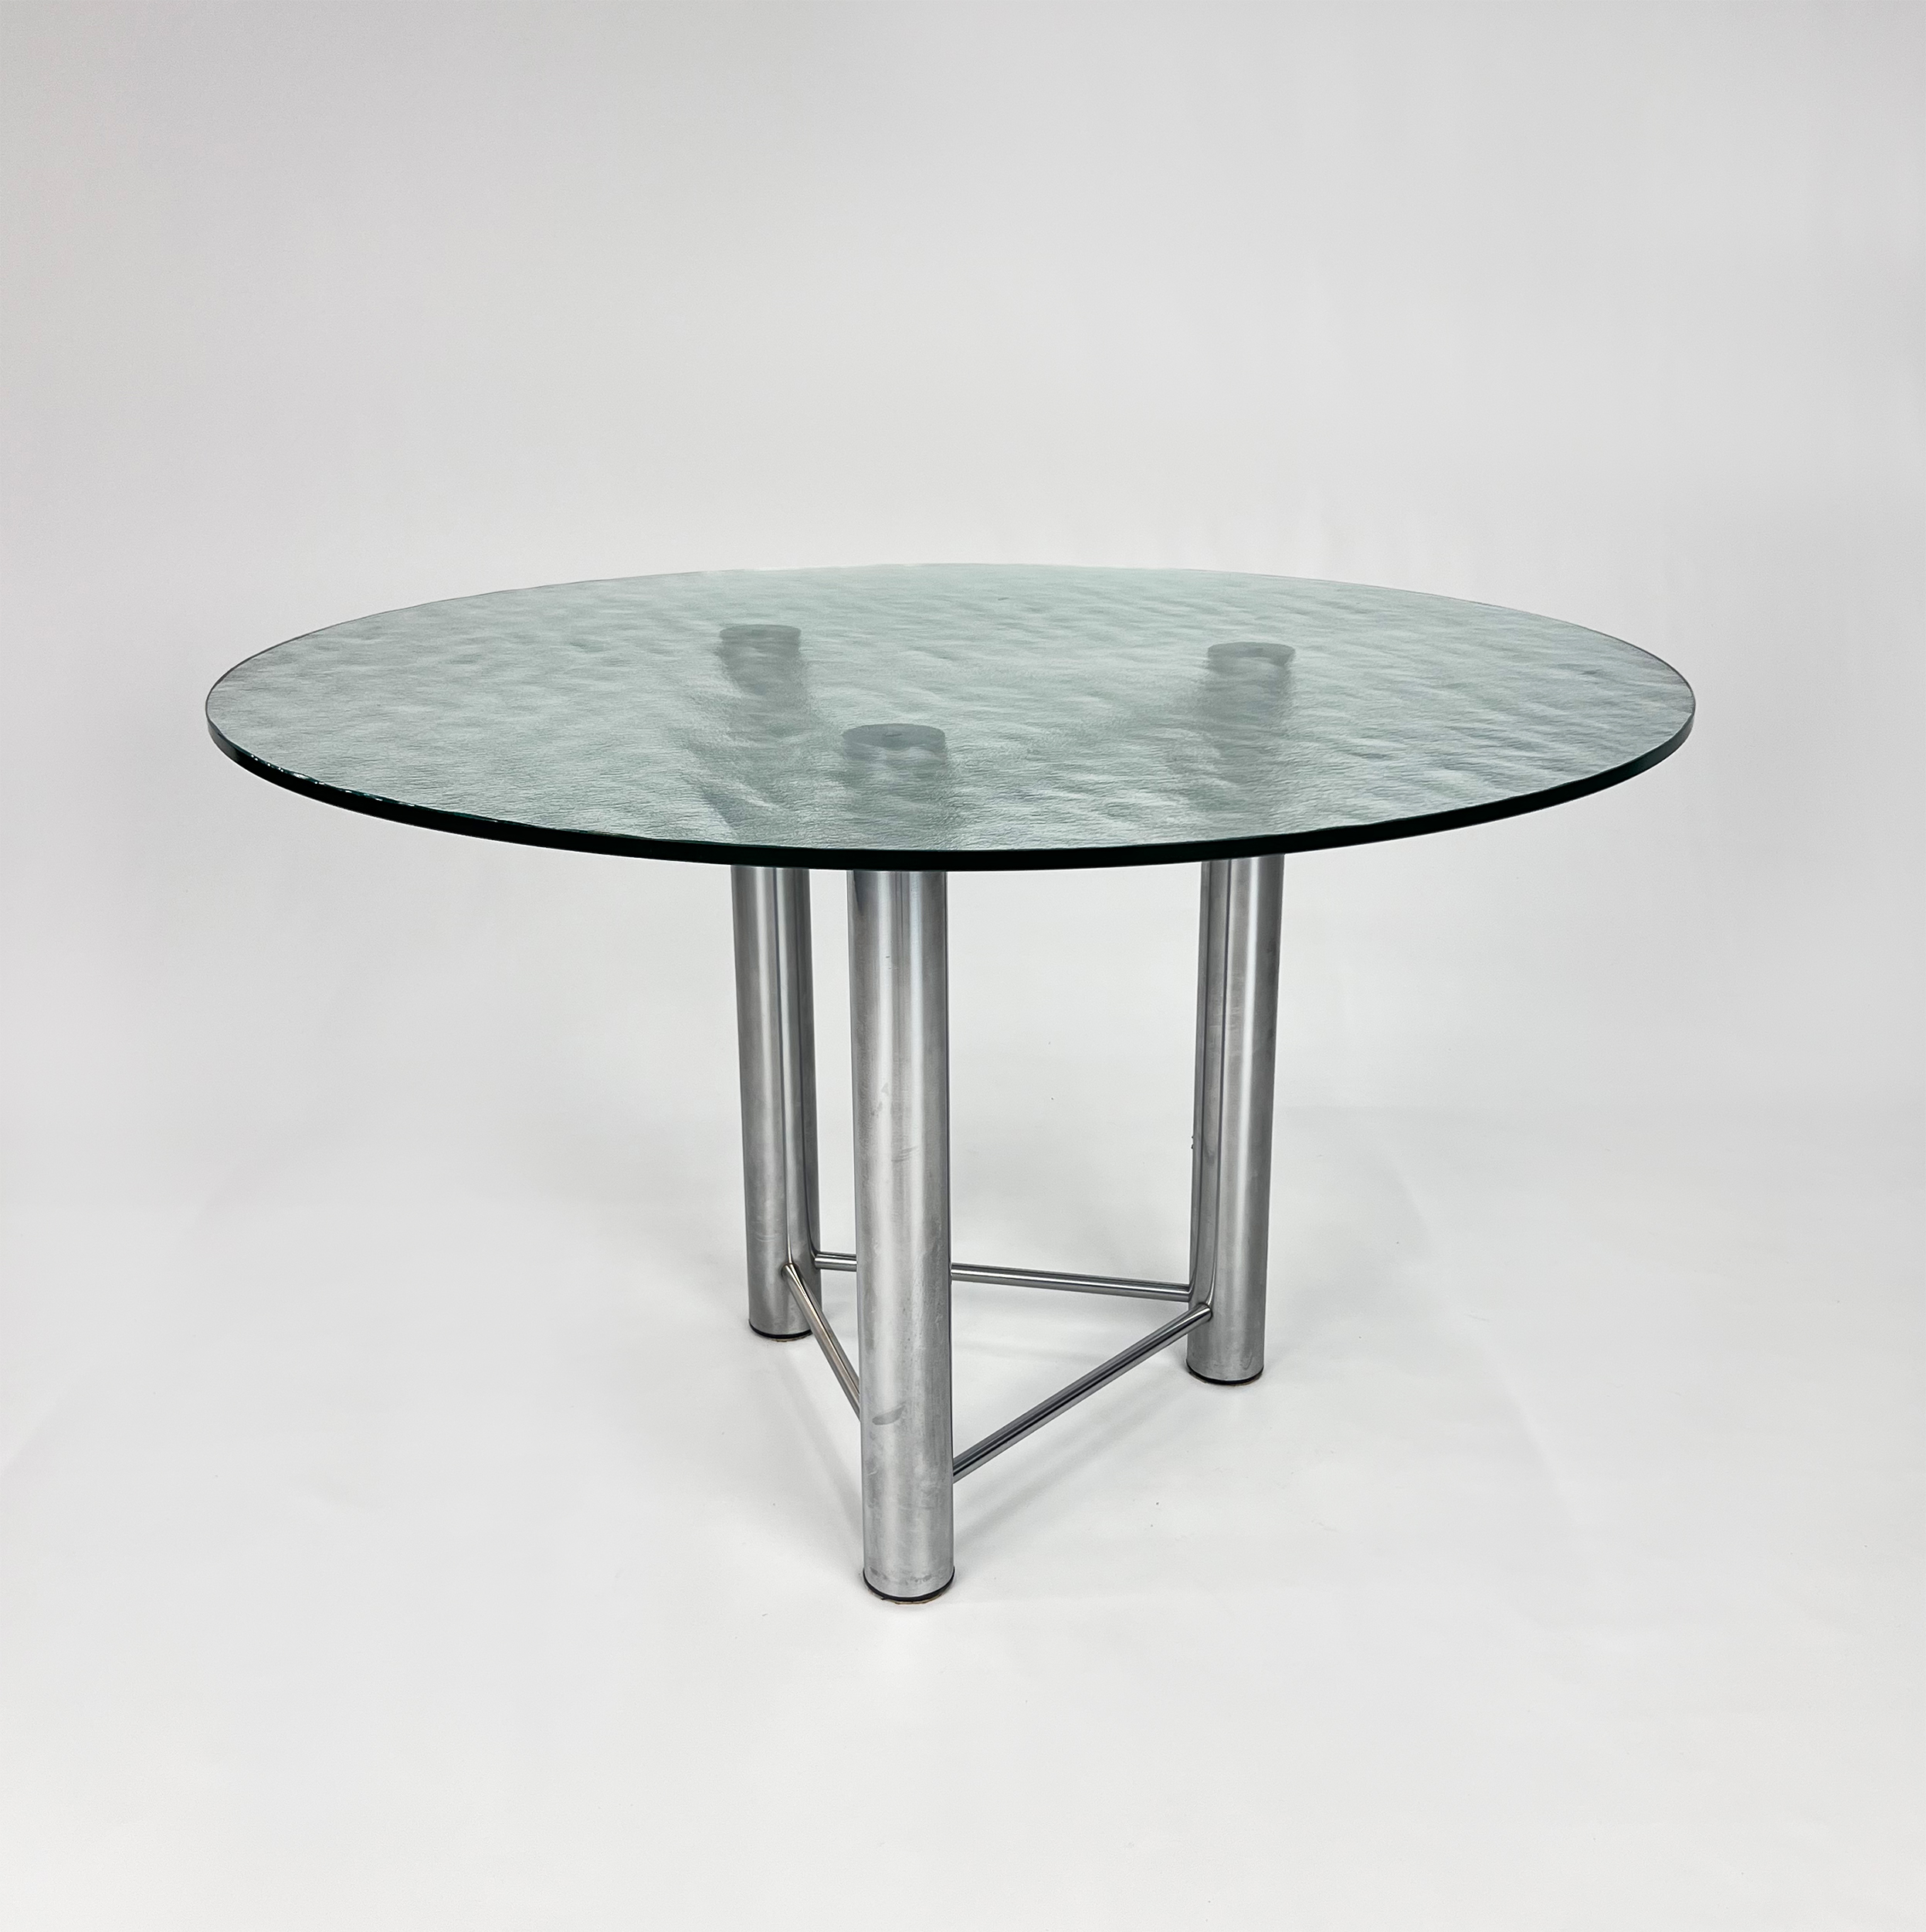 Postmodern Italian Steel and Glass Dining Table, 1980s